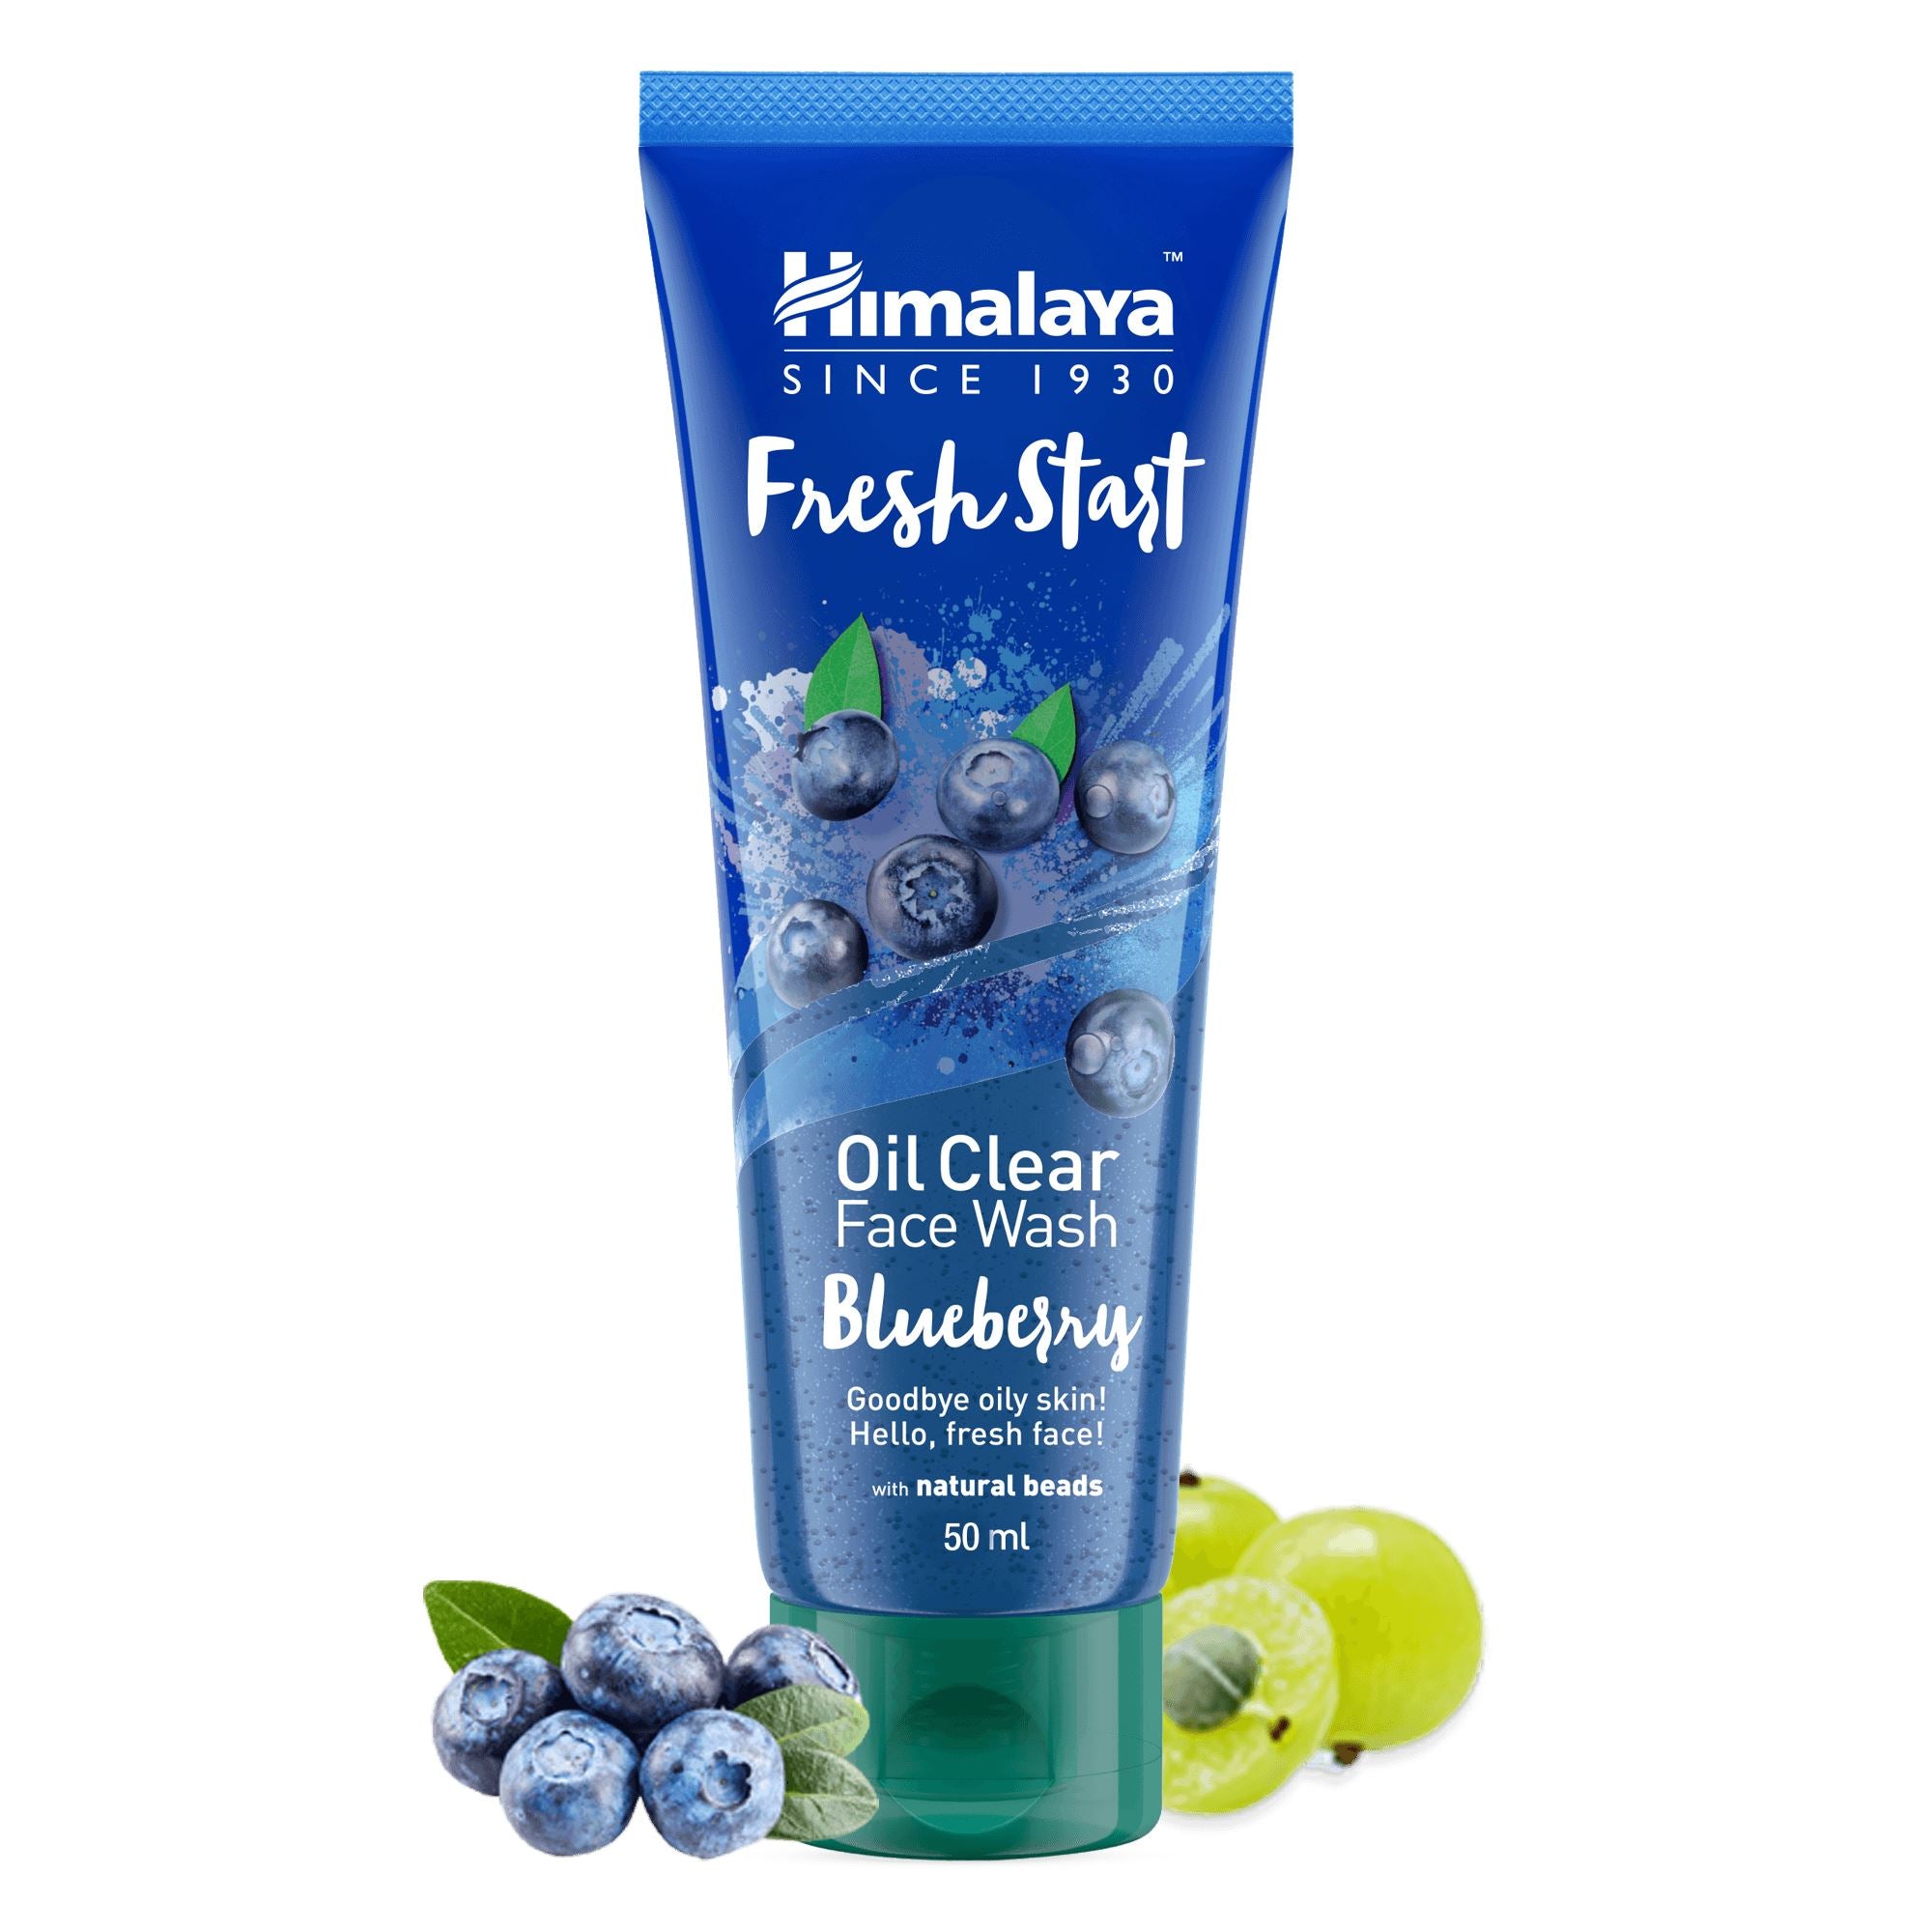 Himalaya Fresh Start Oil Clear Blueberry Face Wash 50ml - Helps remove excess oil, dirt, and impurities